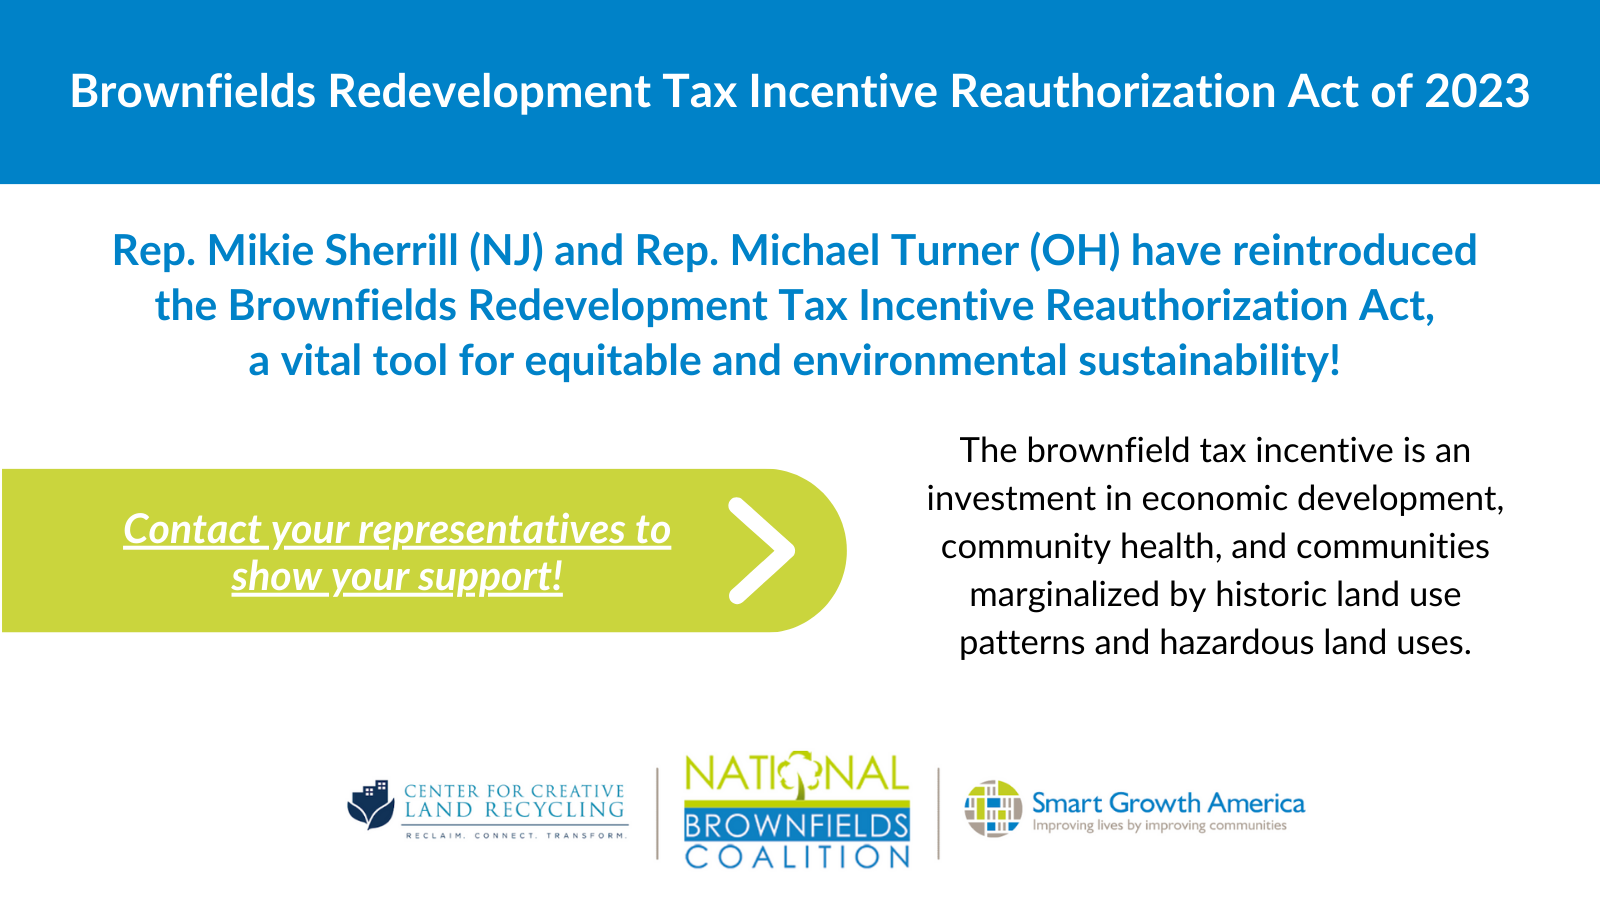 A white graphic with a blue box across the top reads Brownfields Redvelopment Tax Incentive Reauthorization Act of 2023 with information about the bill and Smart Growth America, Center for Creative Land Recycling and National Brownfields Coalition logos. 